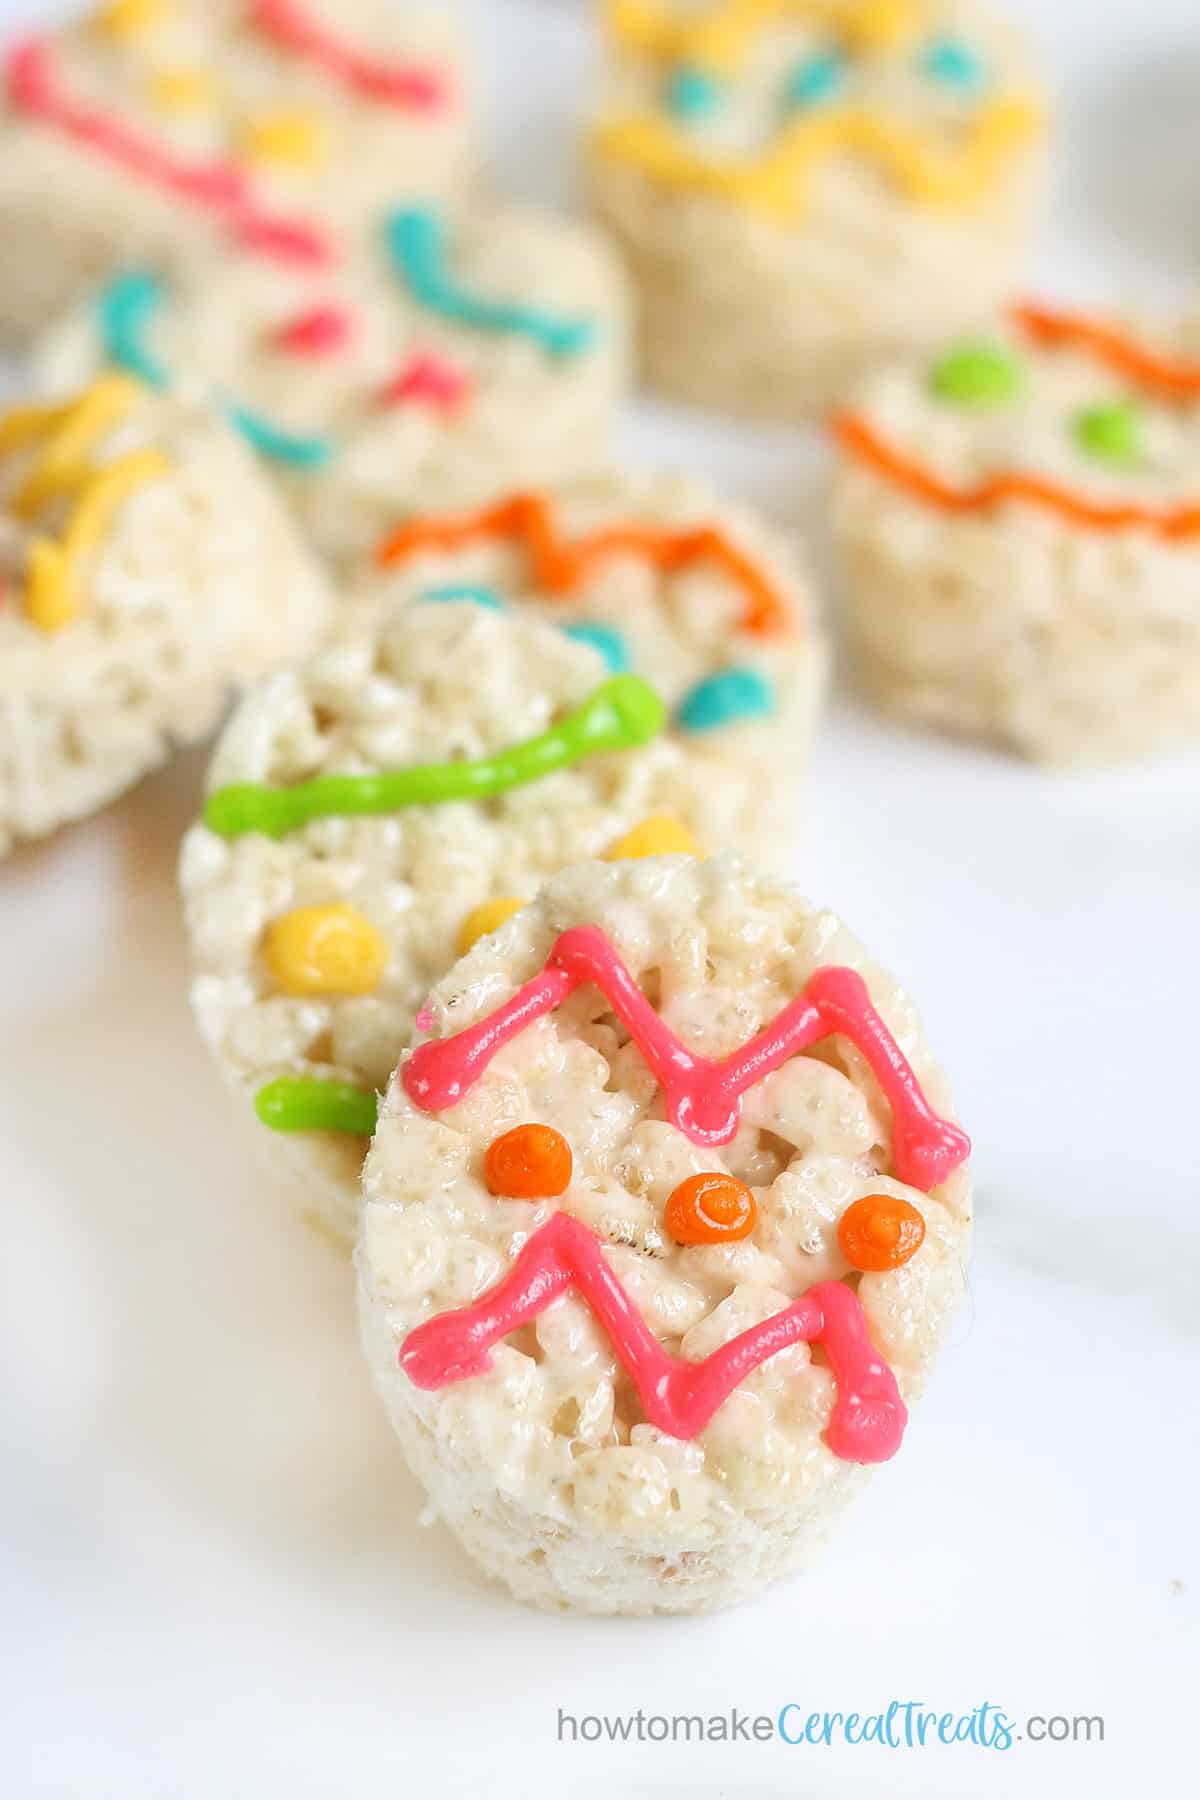 decorated egg cereal treats for Easter